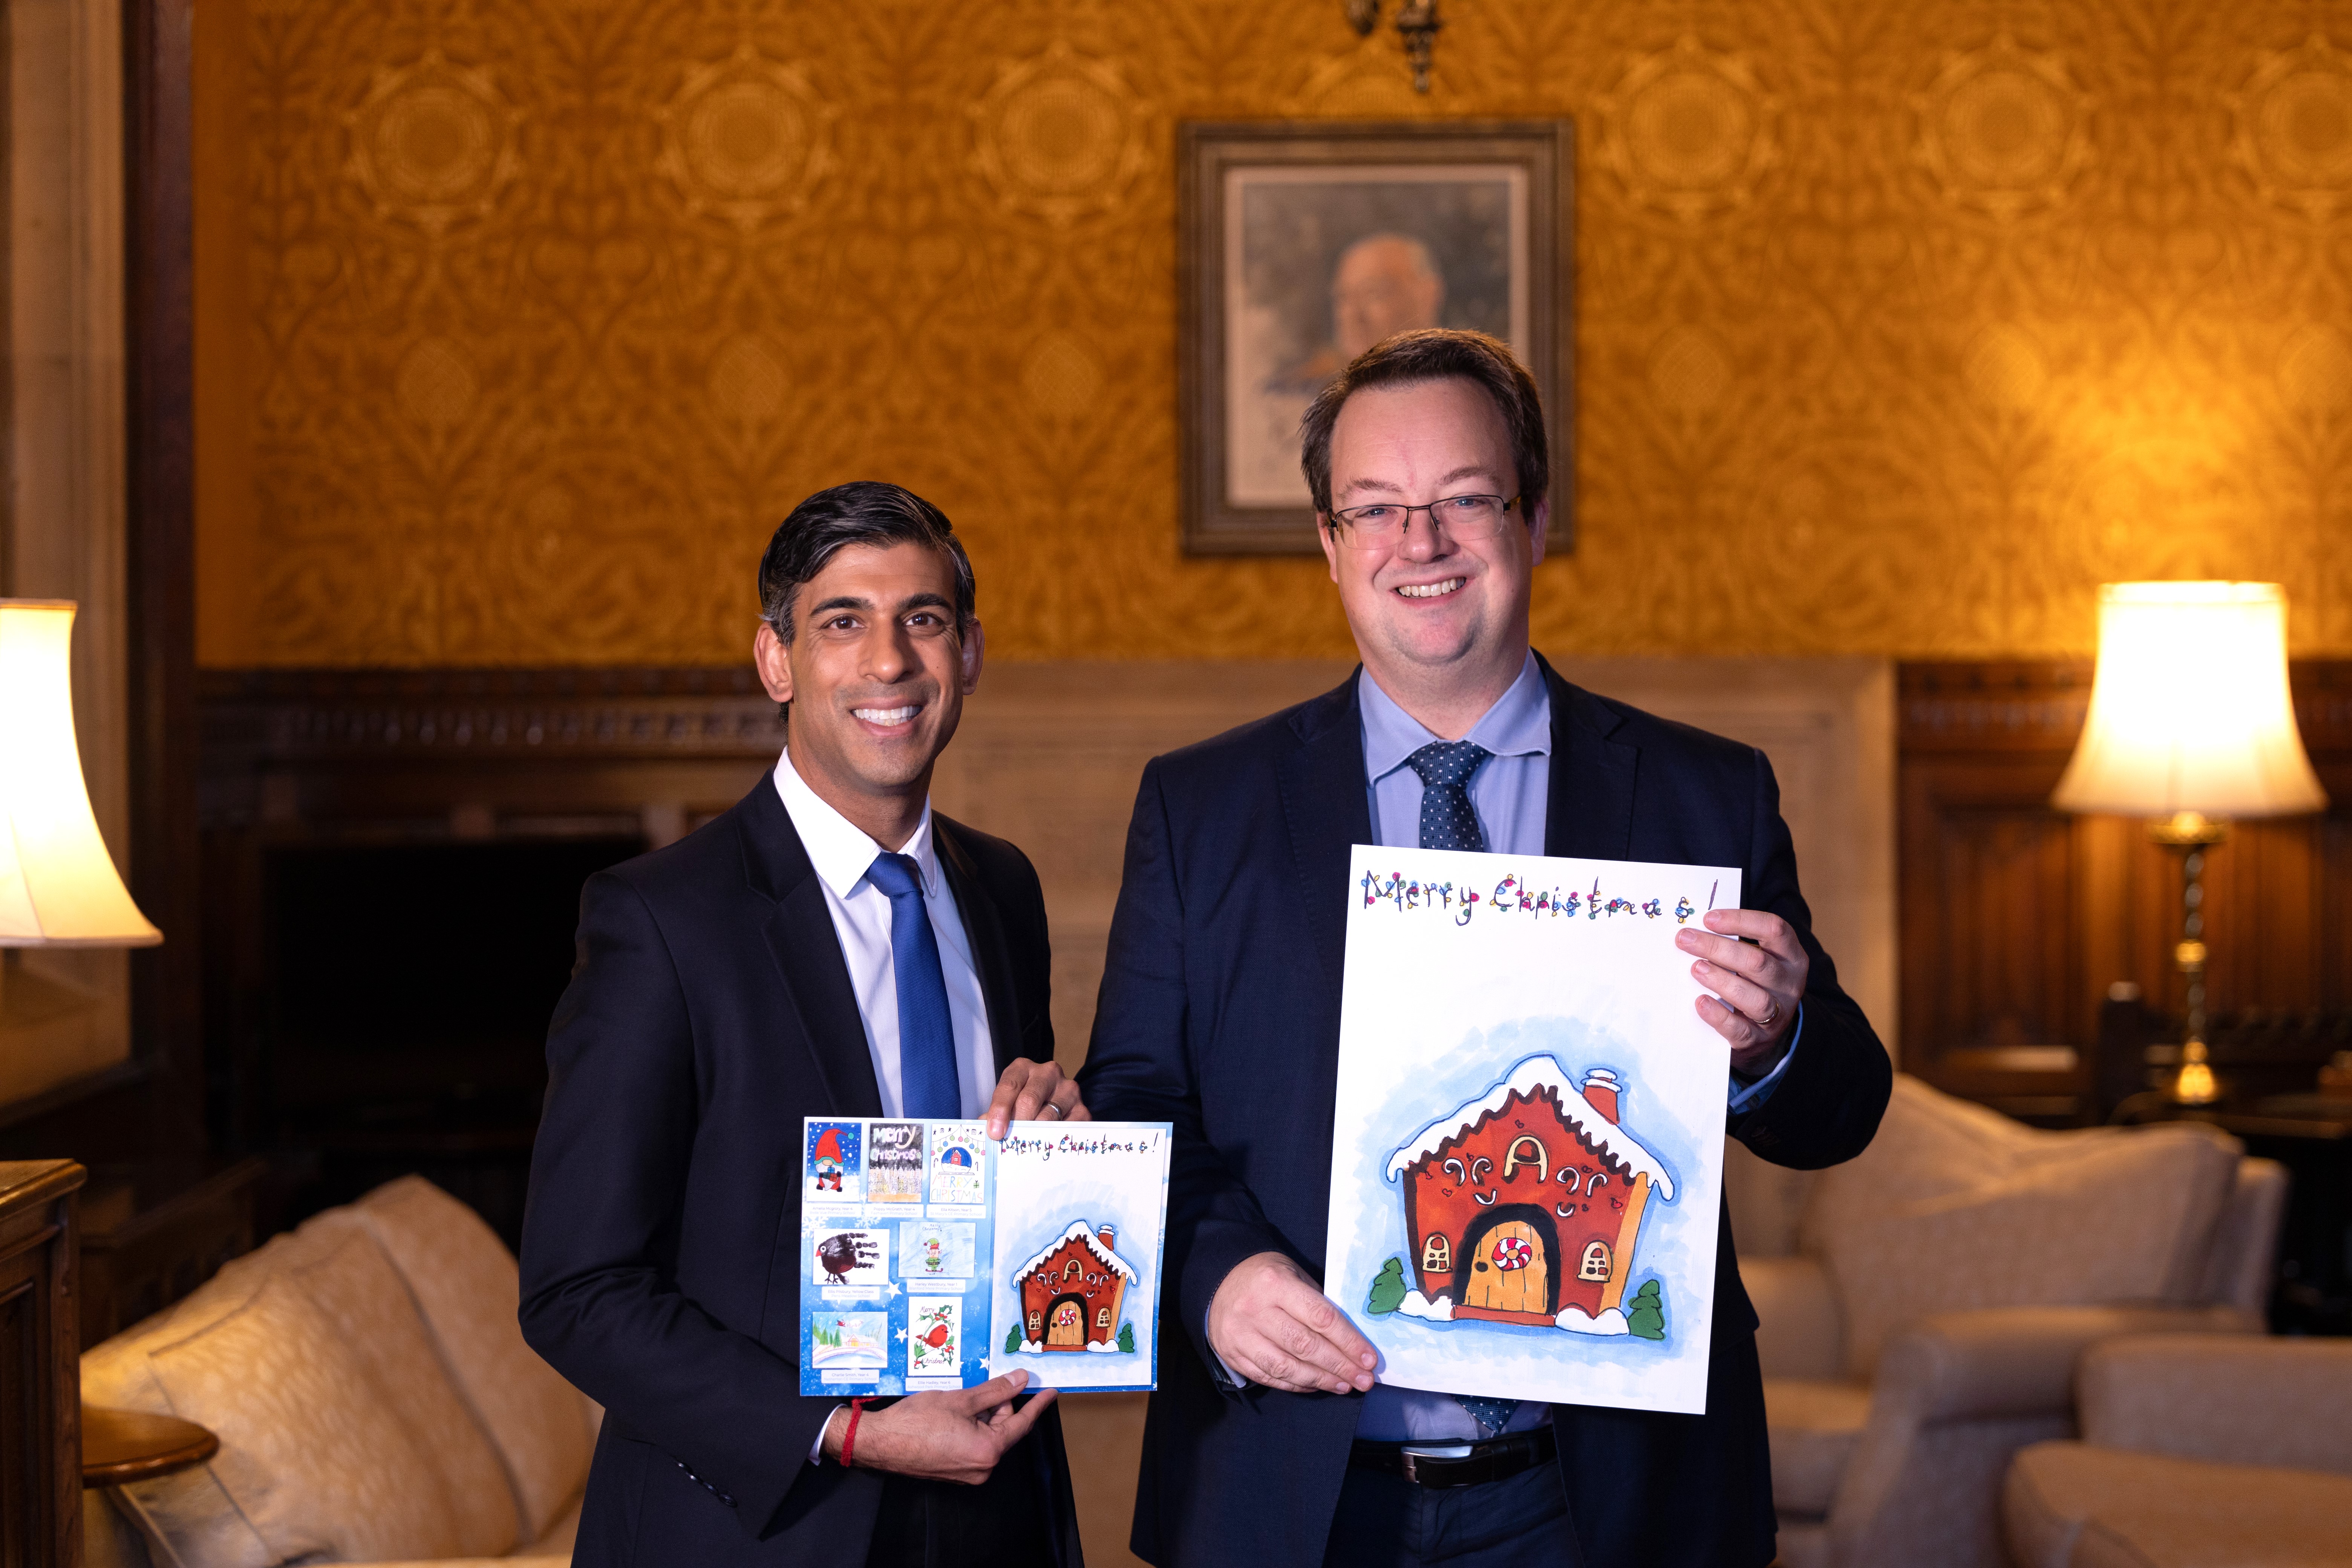 Prime Minister Rishi Sunak with Mike and his 2023 Christmas card showing the winning and runner up designs